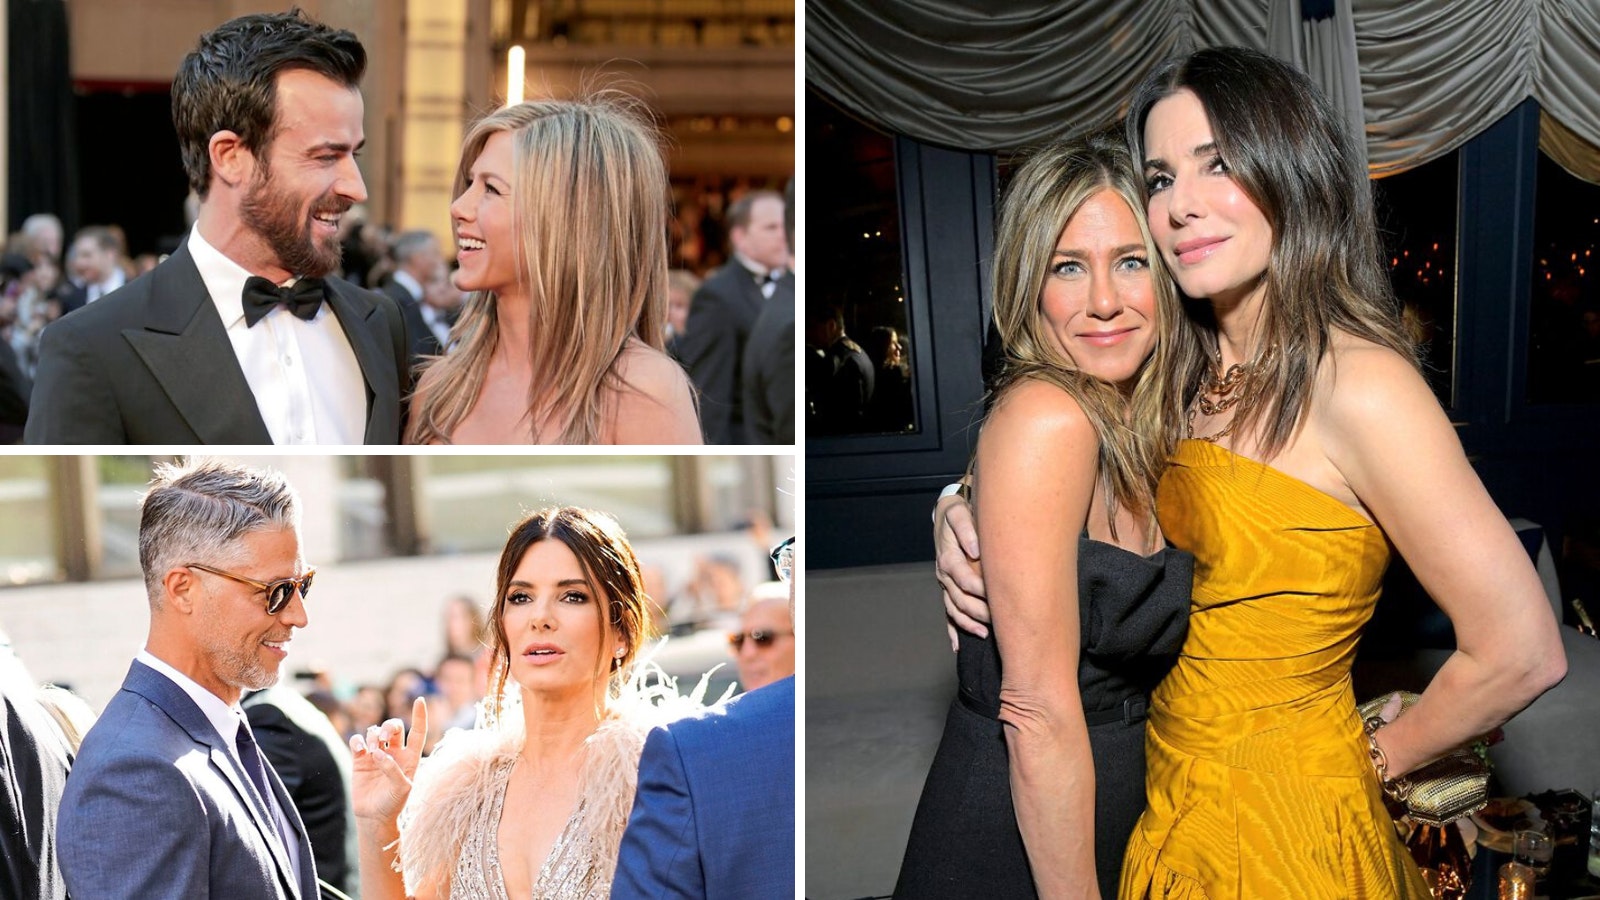 Jennifer Aniston and Sandra Bullock’s makeover pact to find love